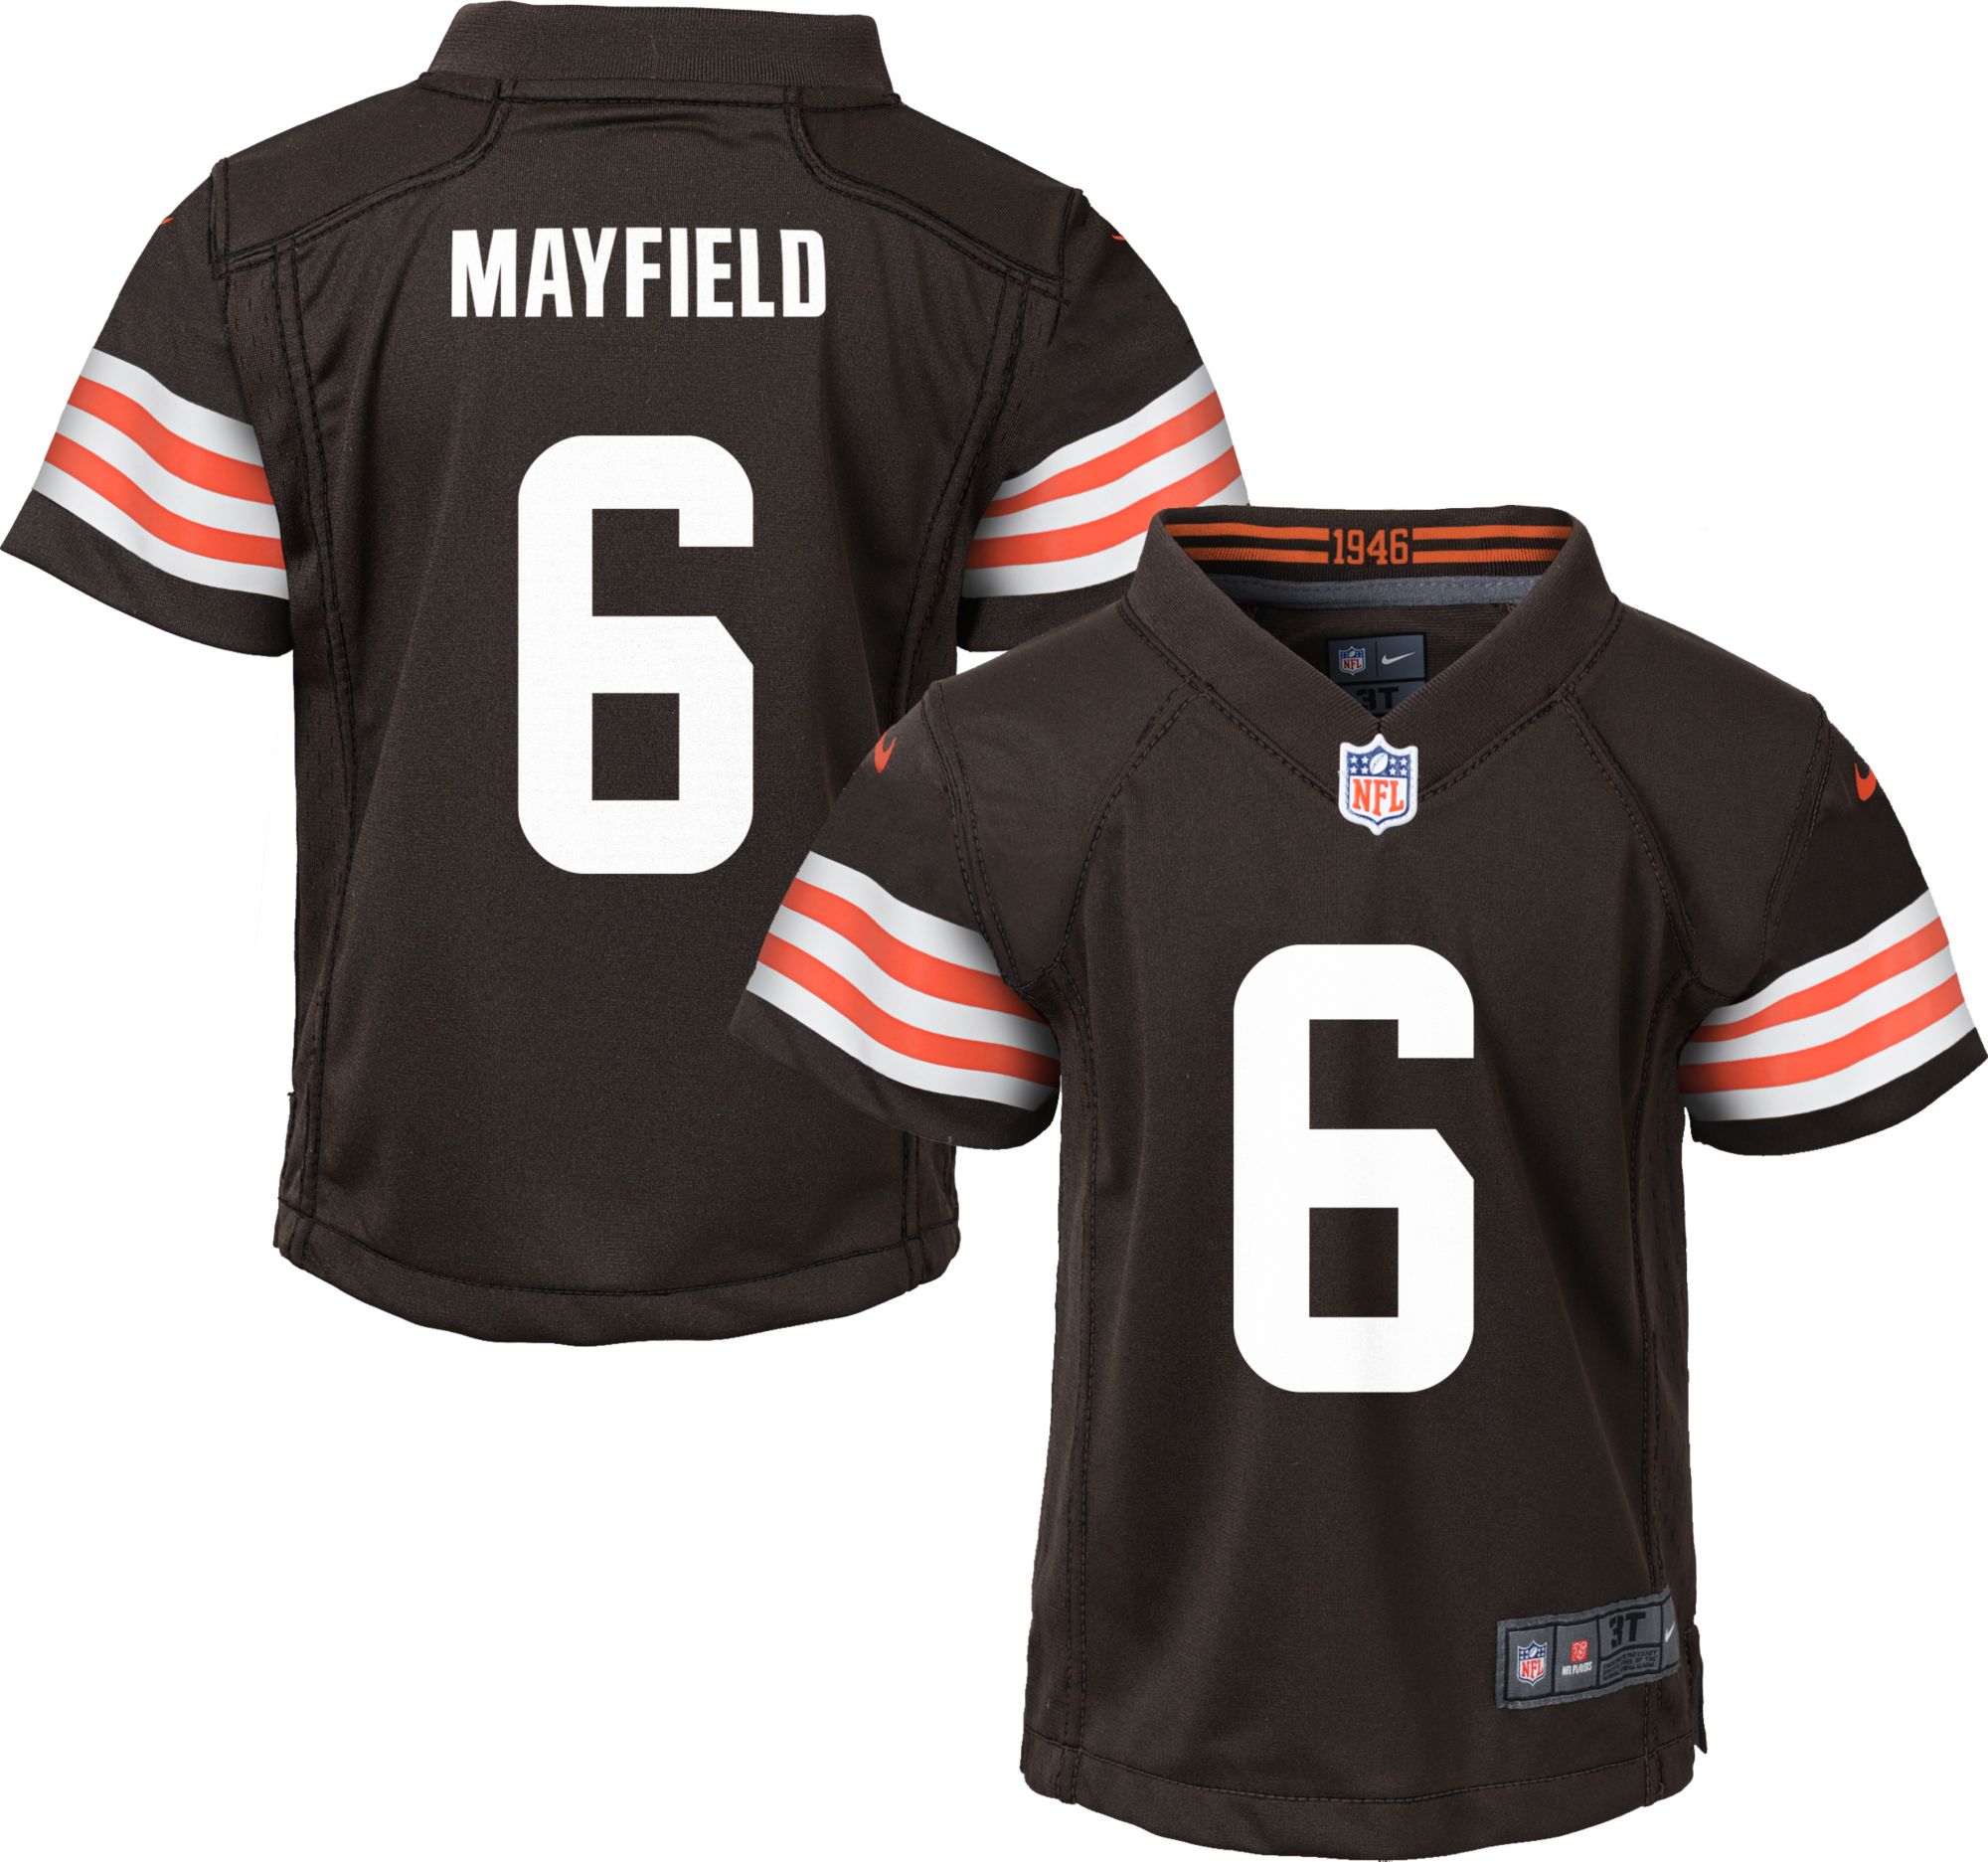 baker mayfield jersey color rush